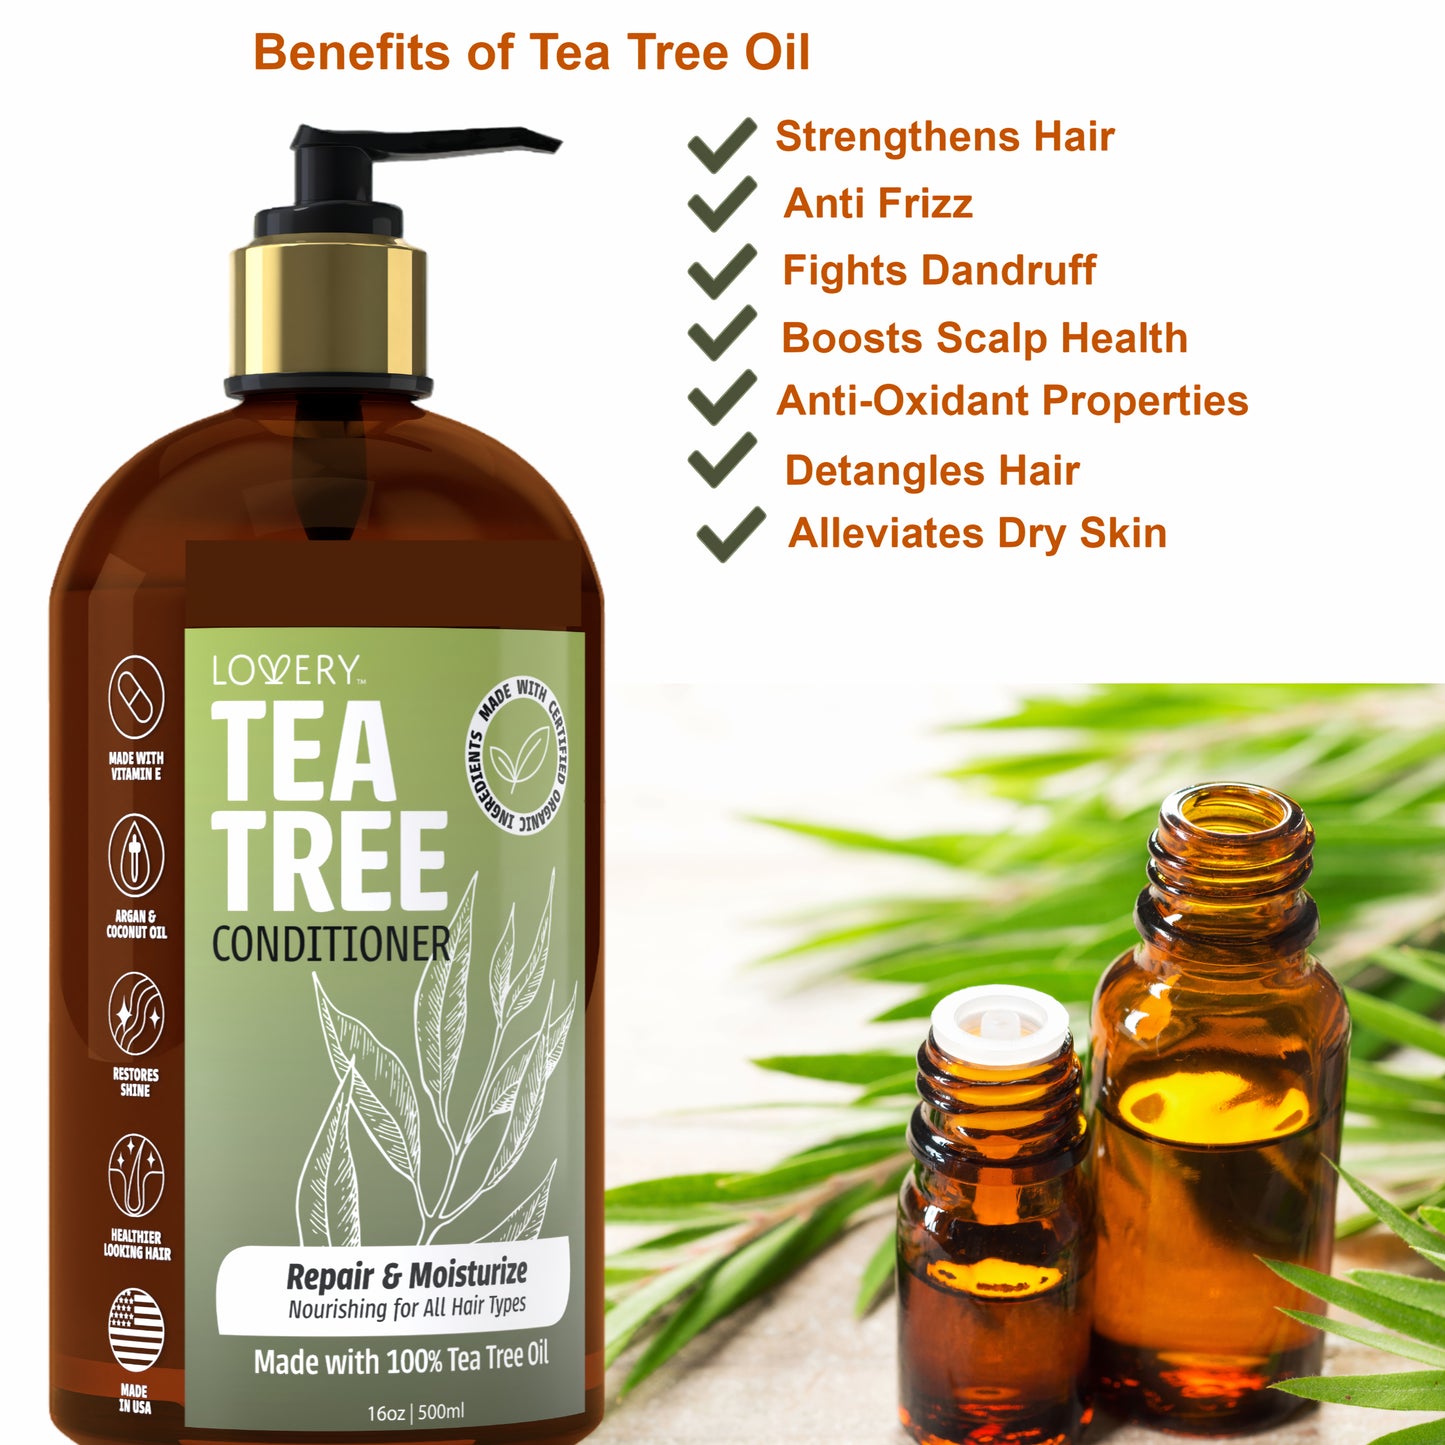 Tea Tree Conditioner - 16oz Organic Hair Care Made in USA